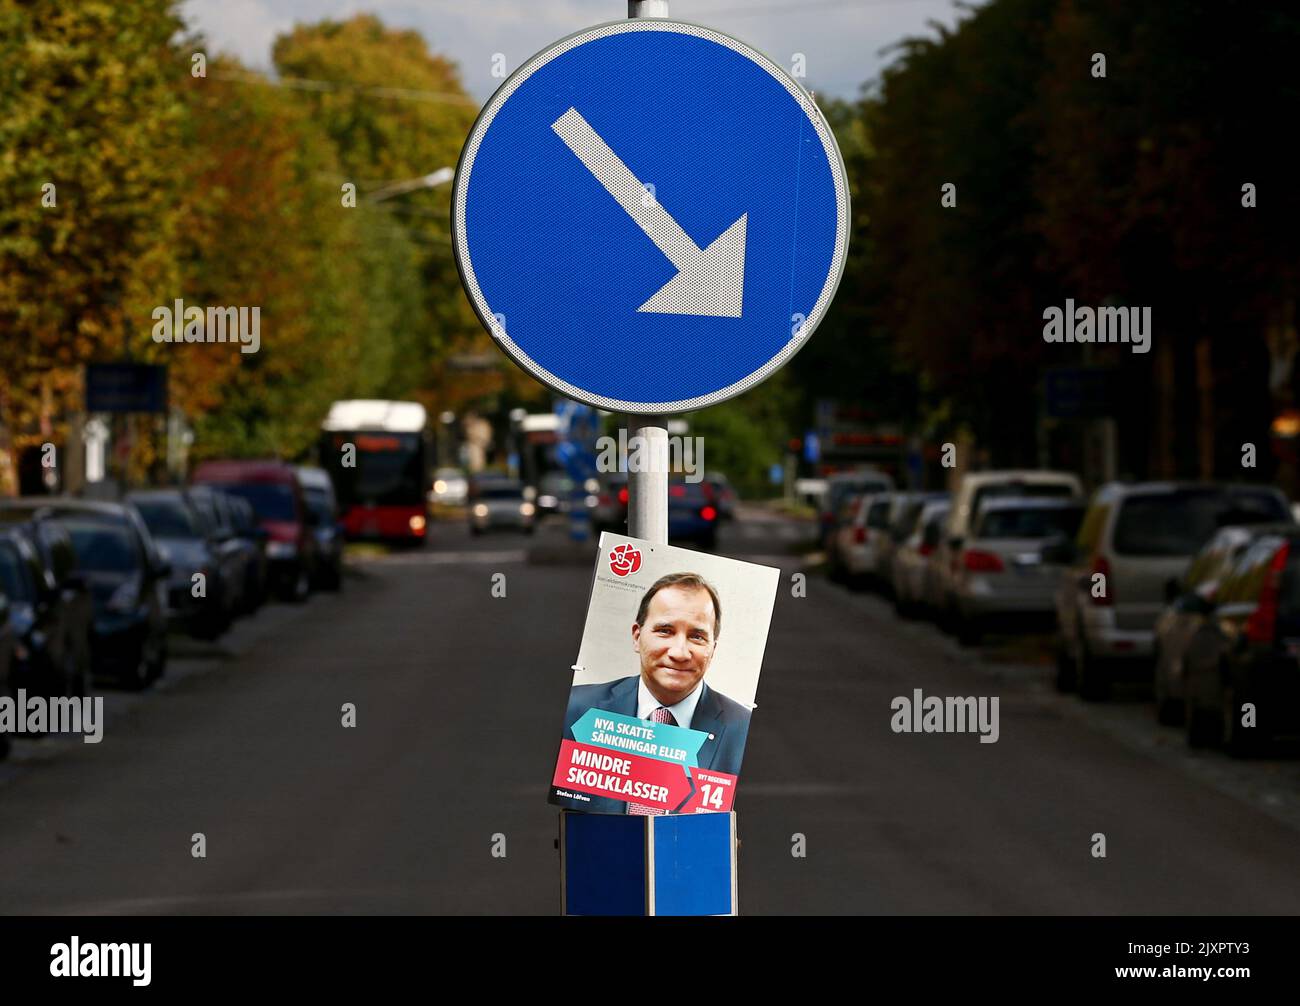 Sweden's future Prime Minister Stefan Löfven, The Swedish Social Democratic Party (In Swedish: Socialdemokraterna), on an election poster at a pedestrian crossing with an arrow pointing to the right. Stock Photo